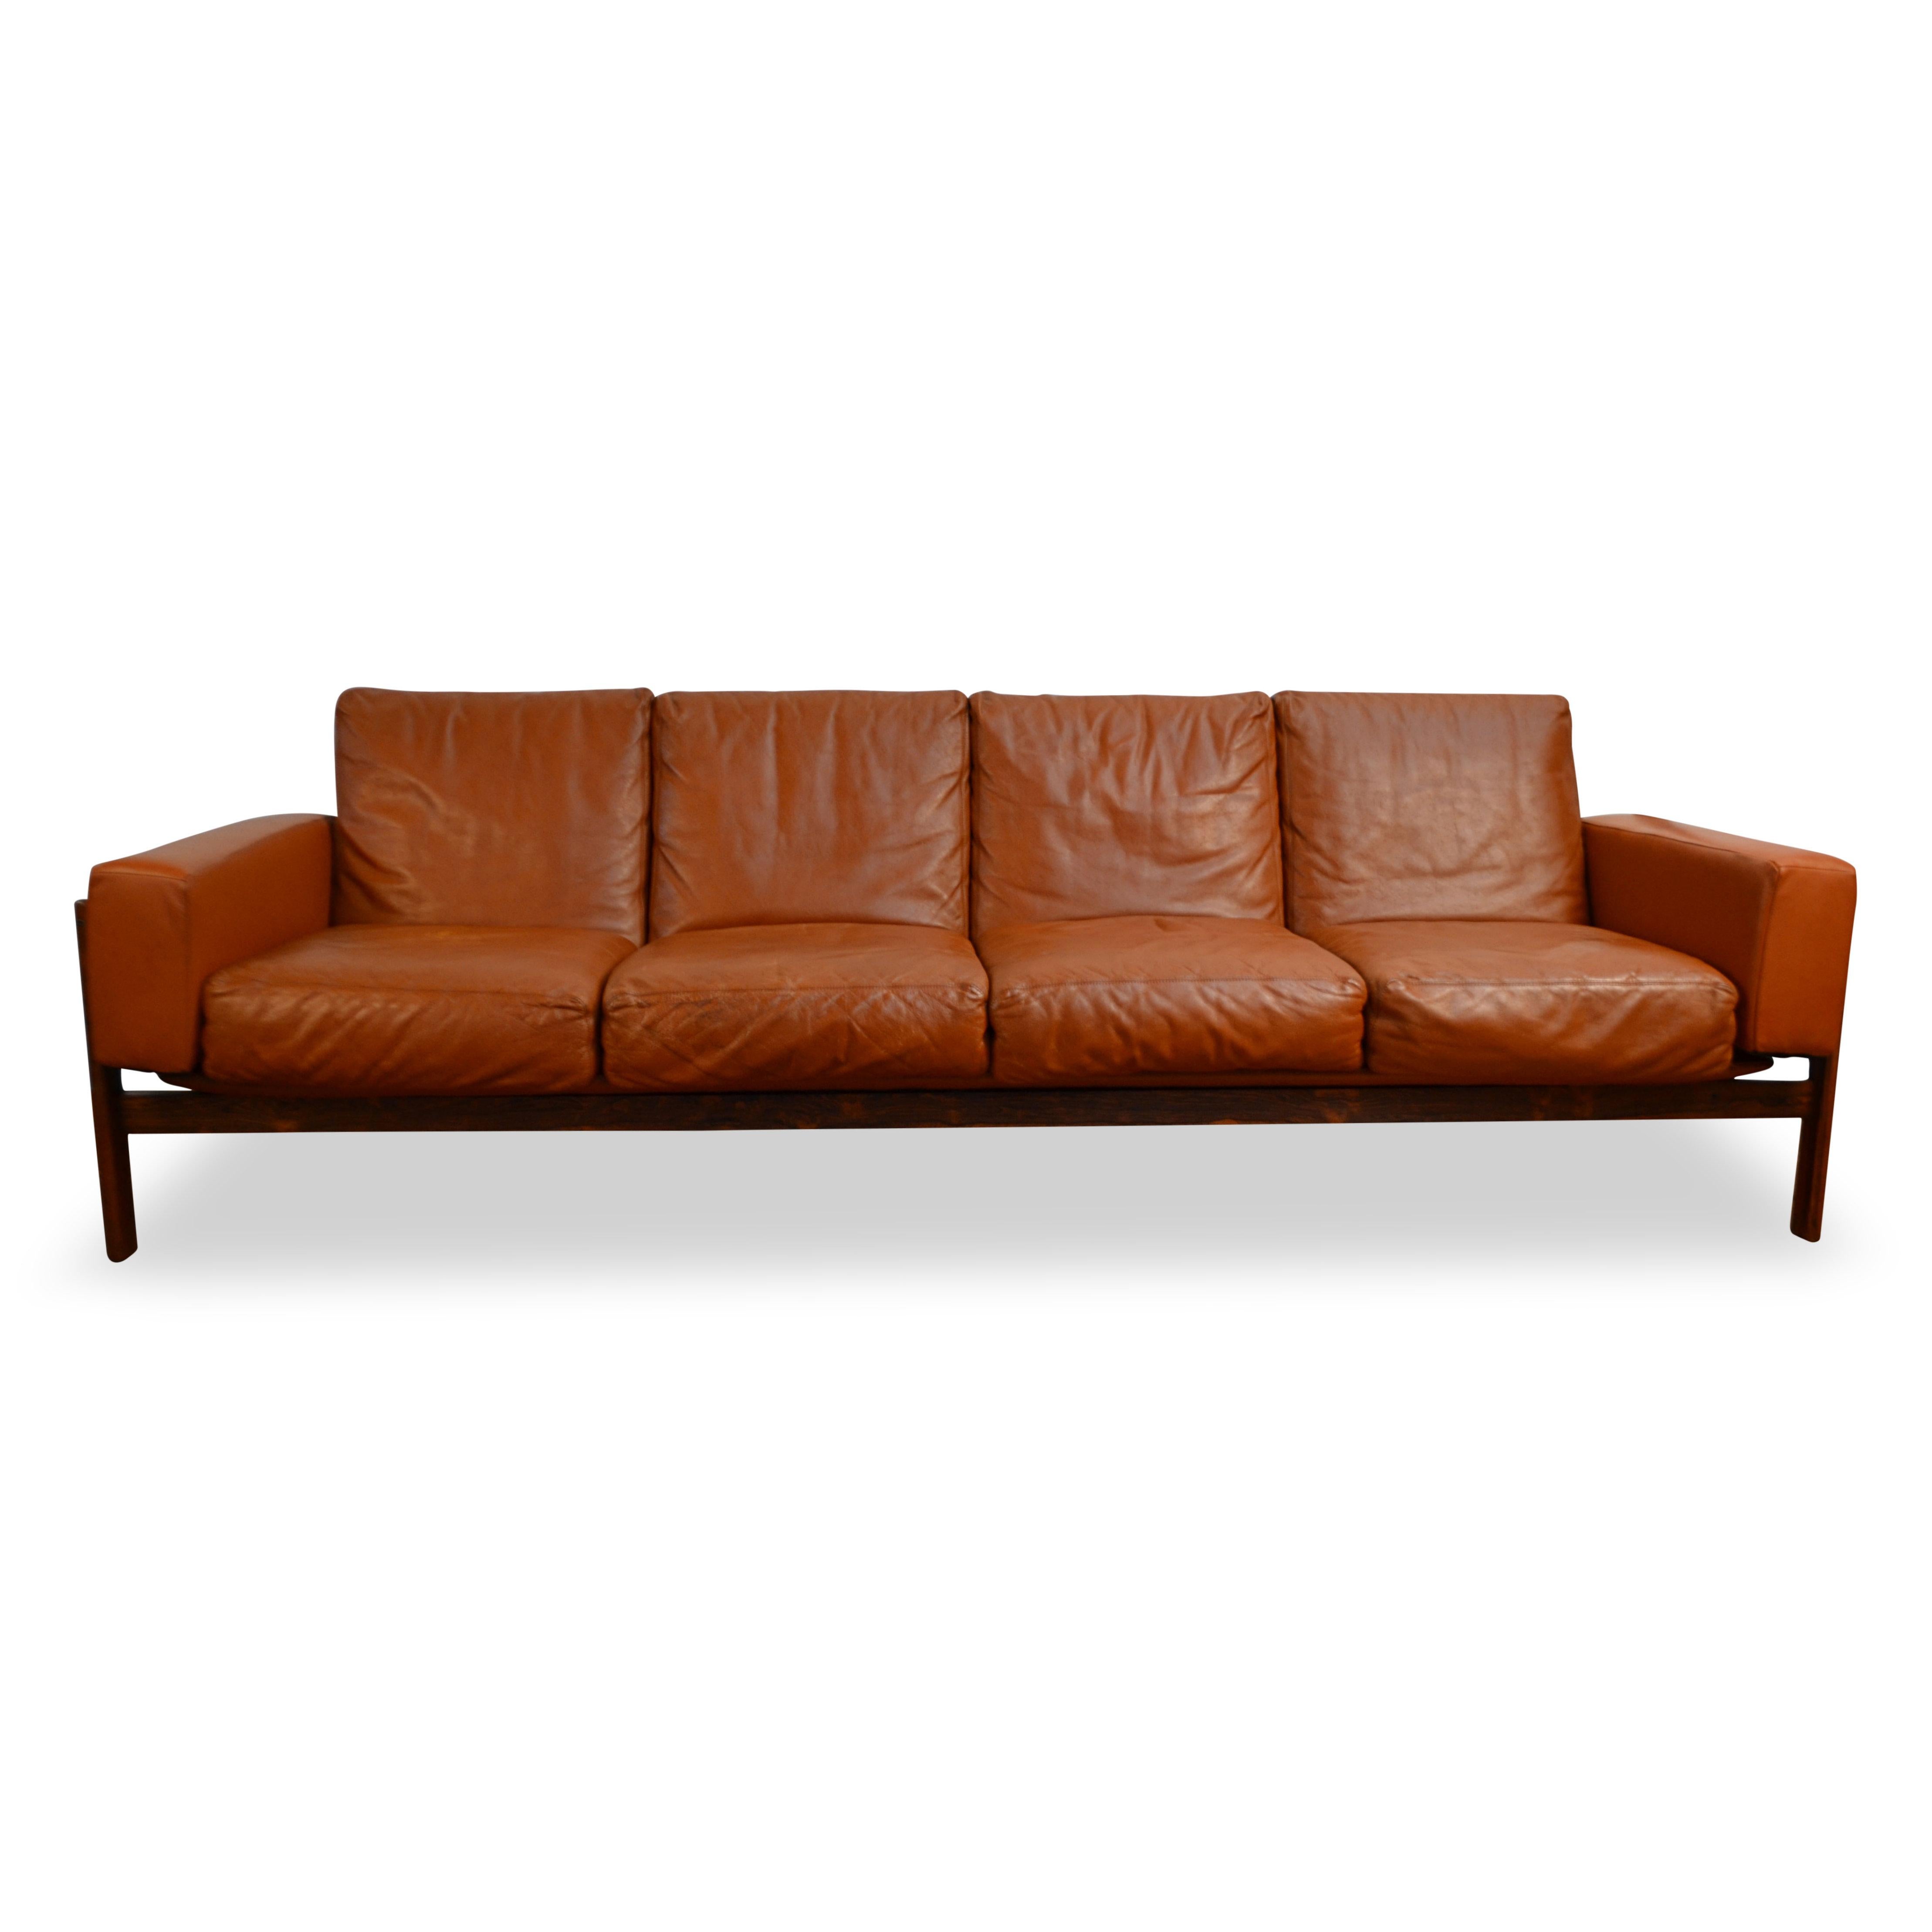 Rare vintage Norwegian design 4-seater rosewood and leather sofa, model Flueline. Designed by Sven Ivar Dysthe for Dokka Møbler in the 1960s. This iconic design piece has eight loose cushions, and two armrest cushions in gorgeous